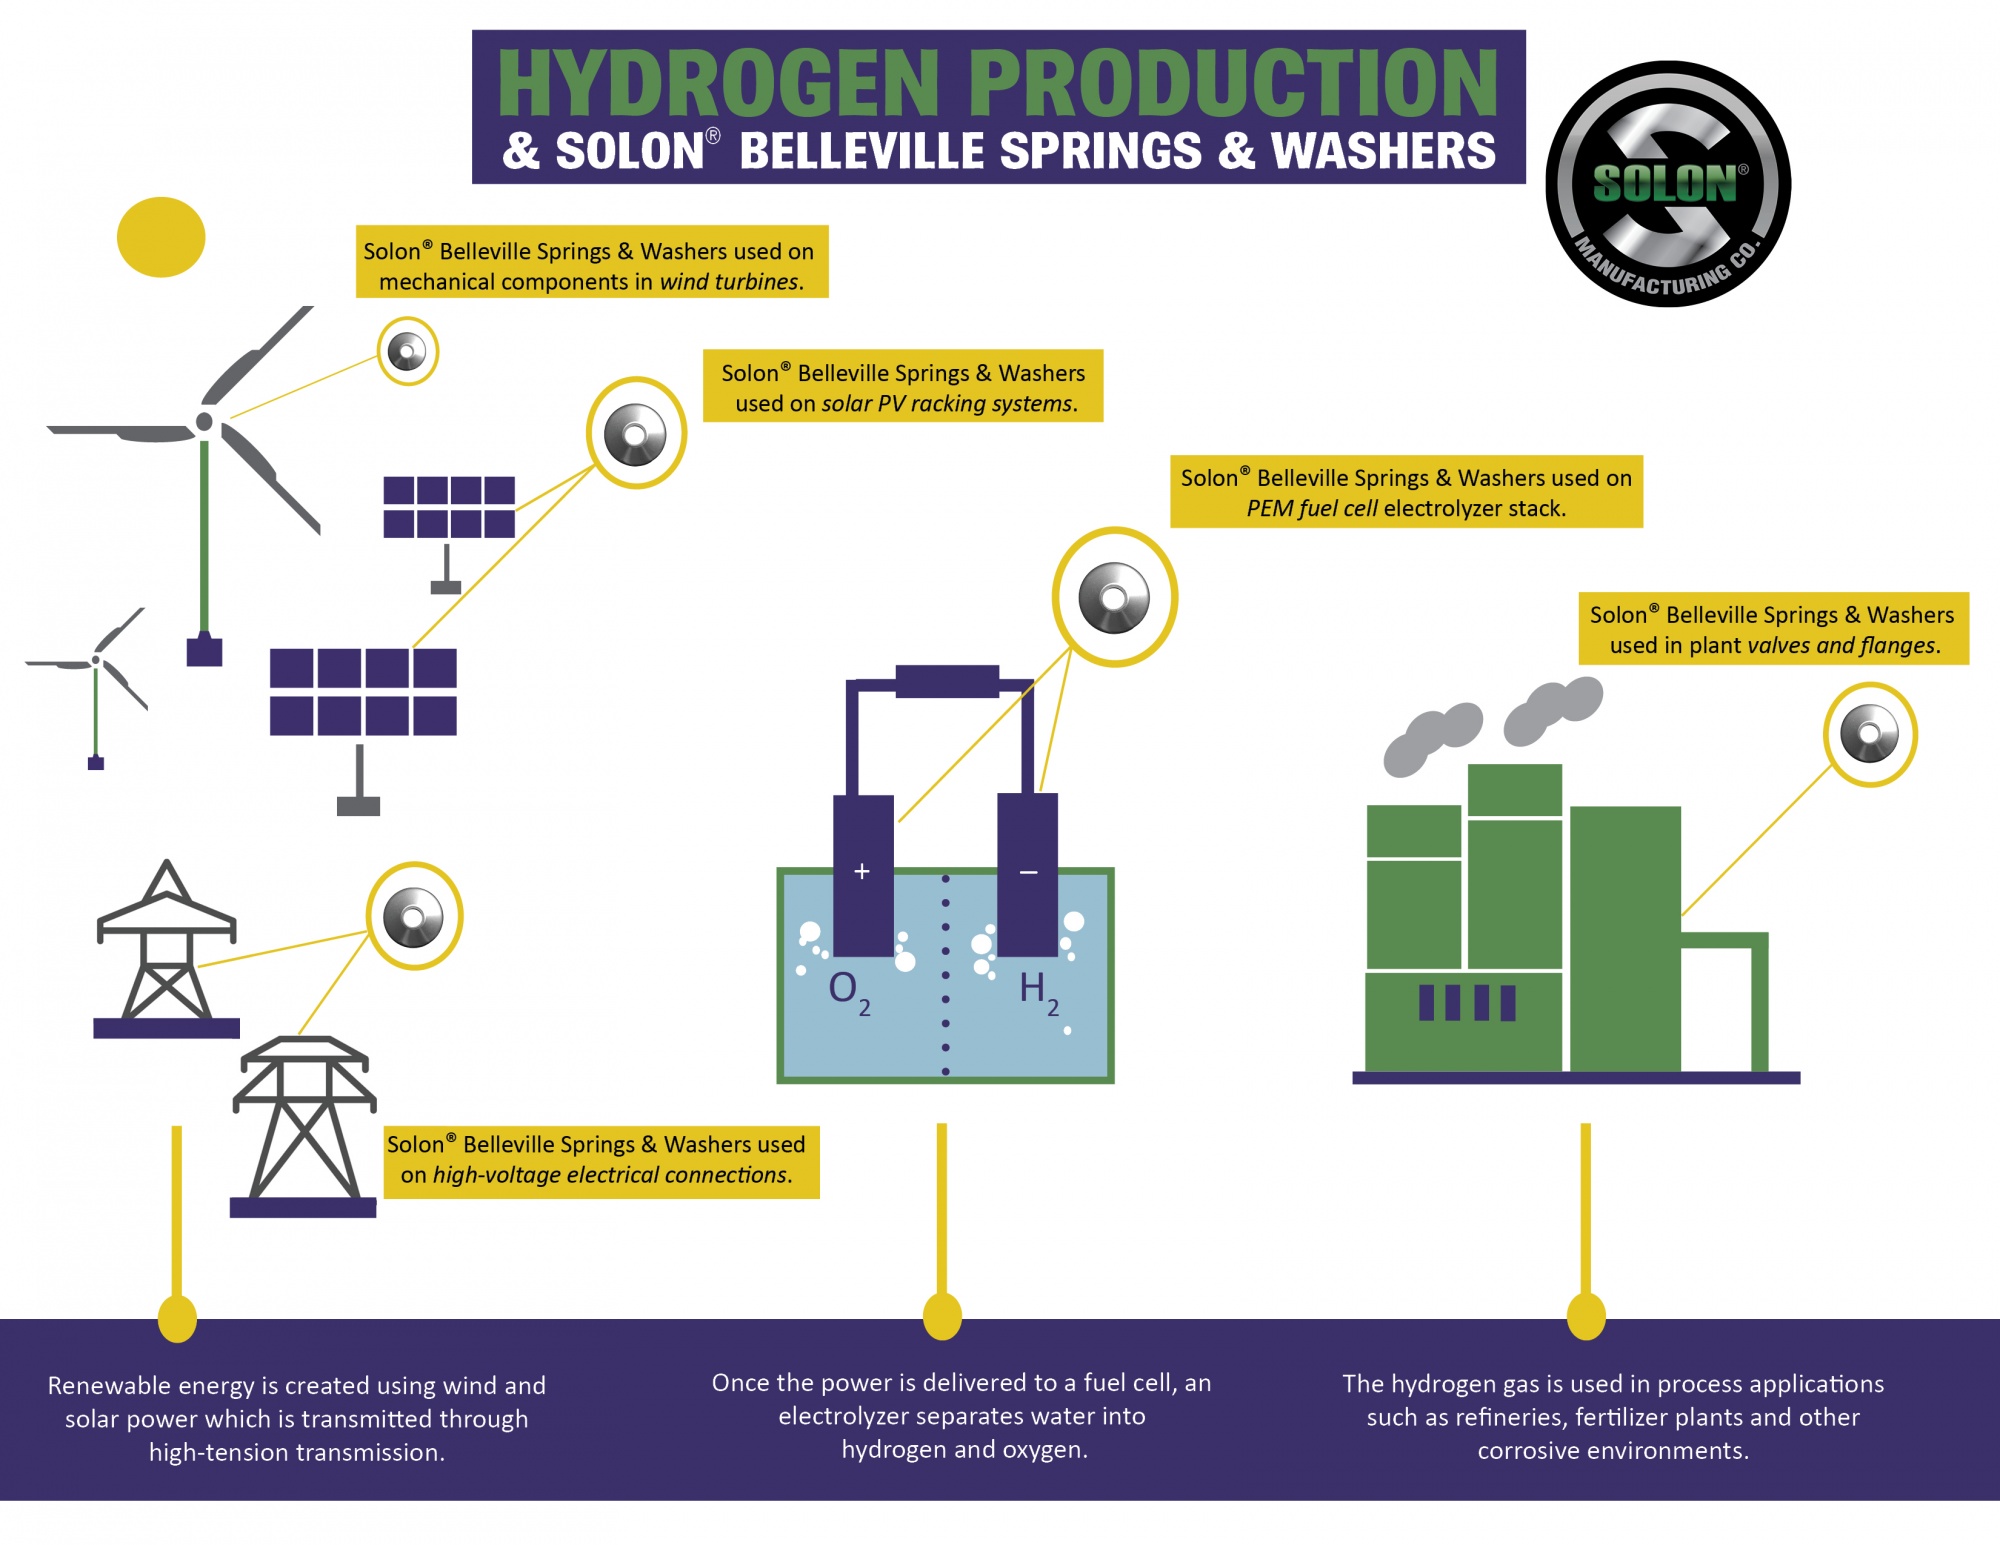 Solon Belleville Springs And Washers Used In Hydrogen Production Infographic